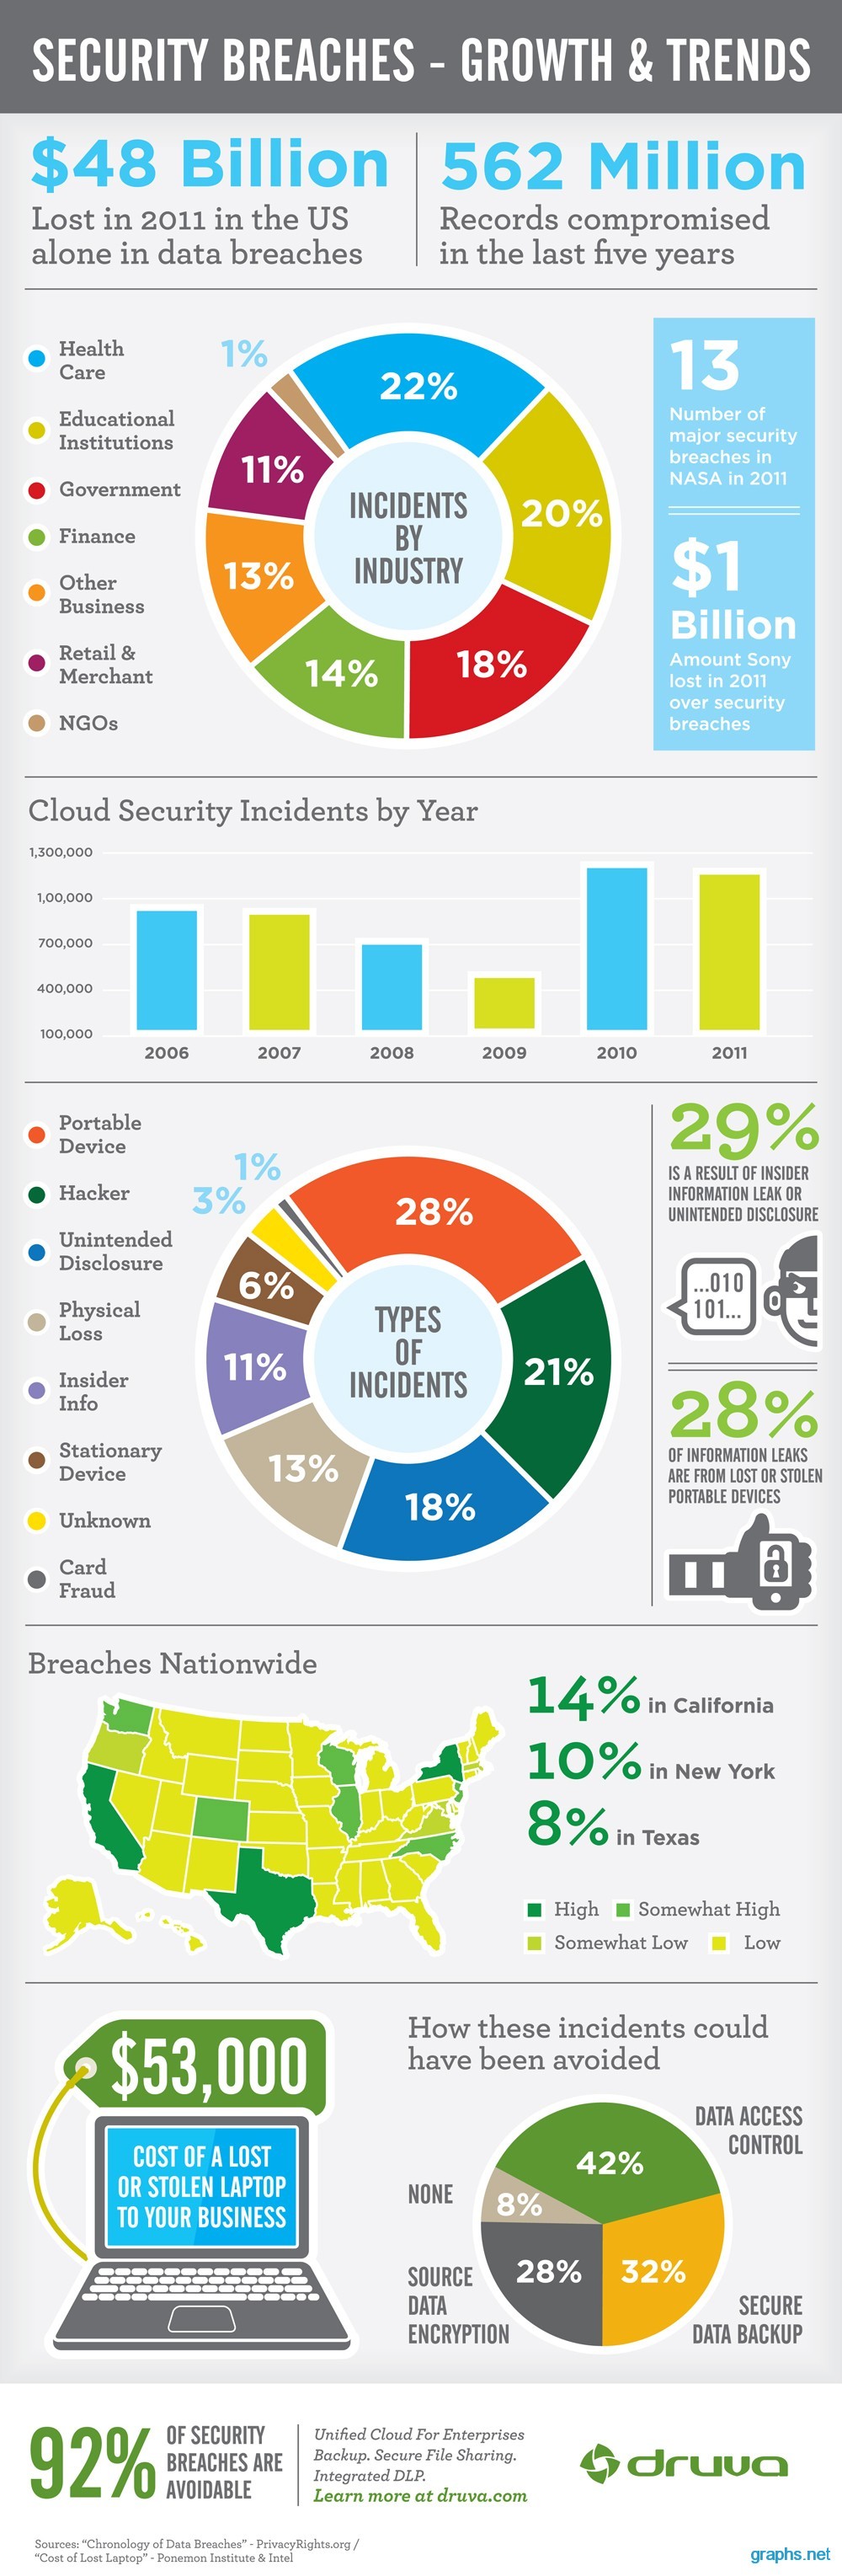 Security Breaches Growth and Trends